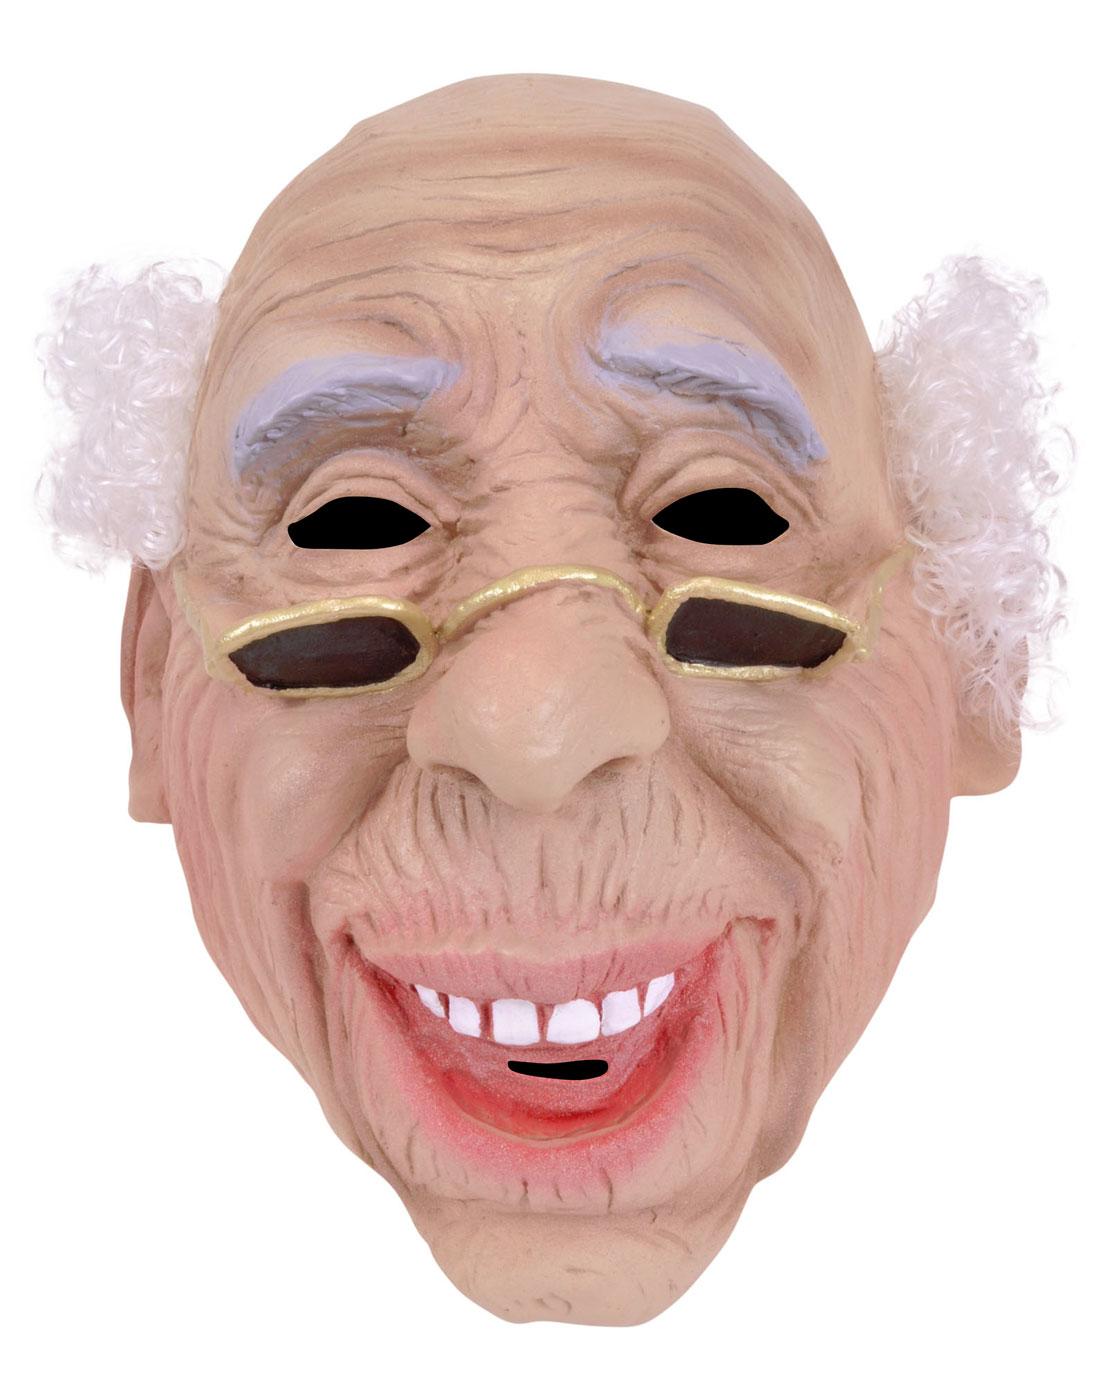 Old Man Mask with White Hair by Bristol Novelties BM235 from a collection of funny costume masks available here at Karnival Costumes online party shop